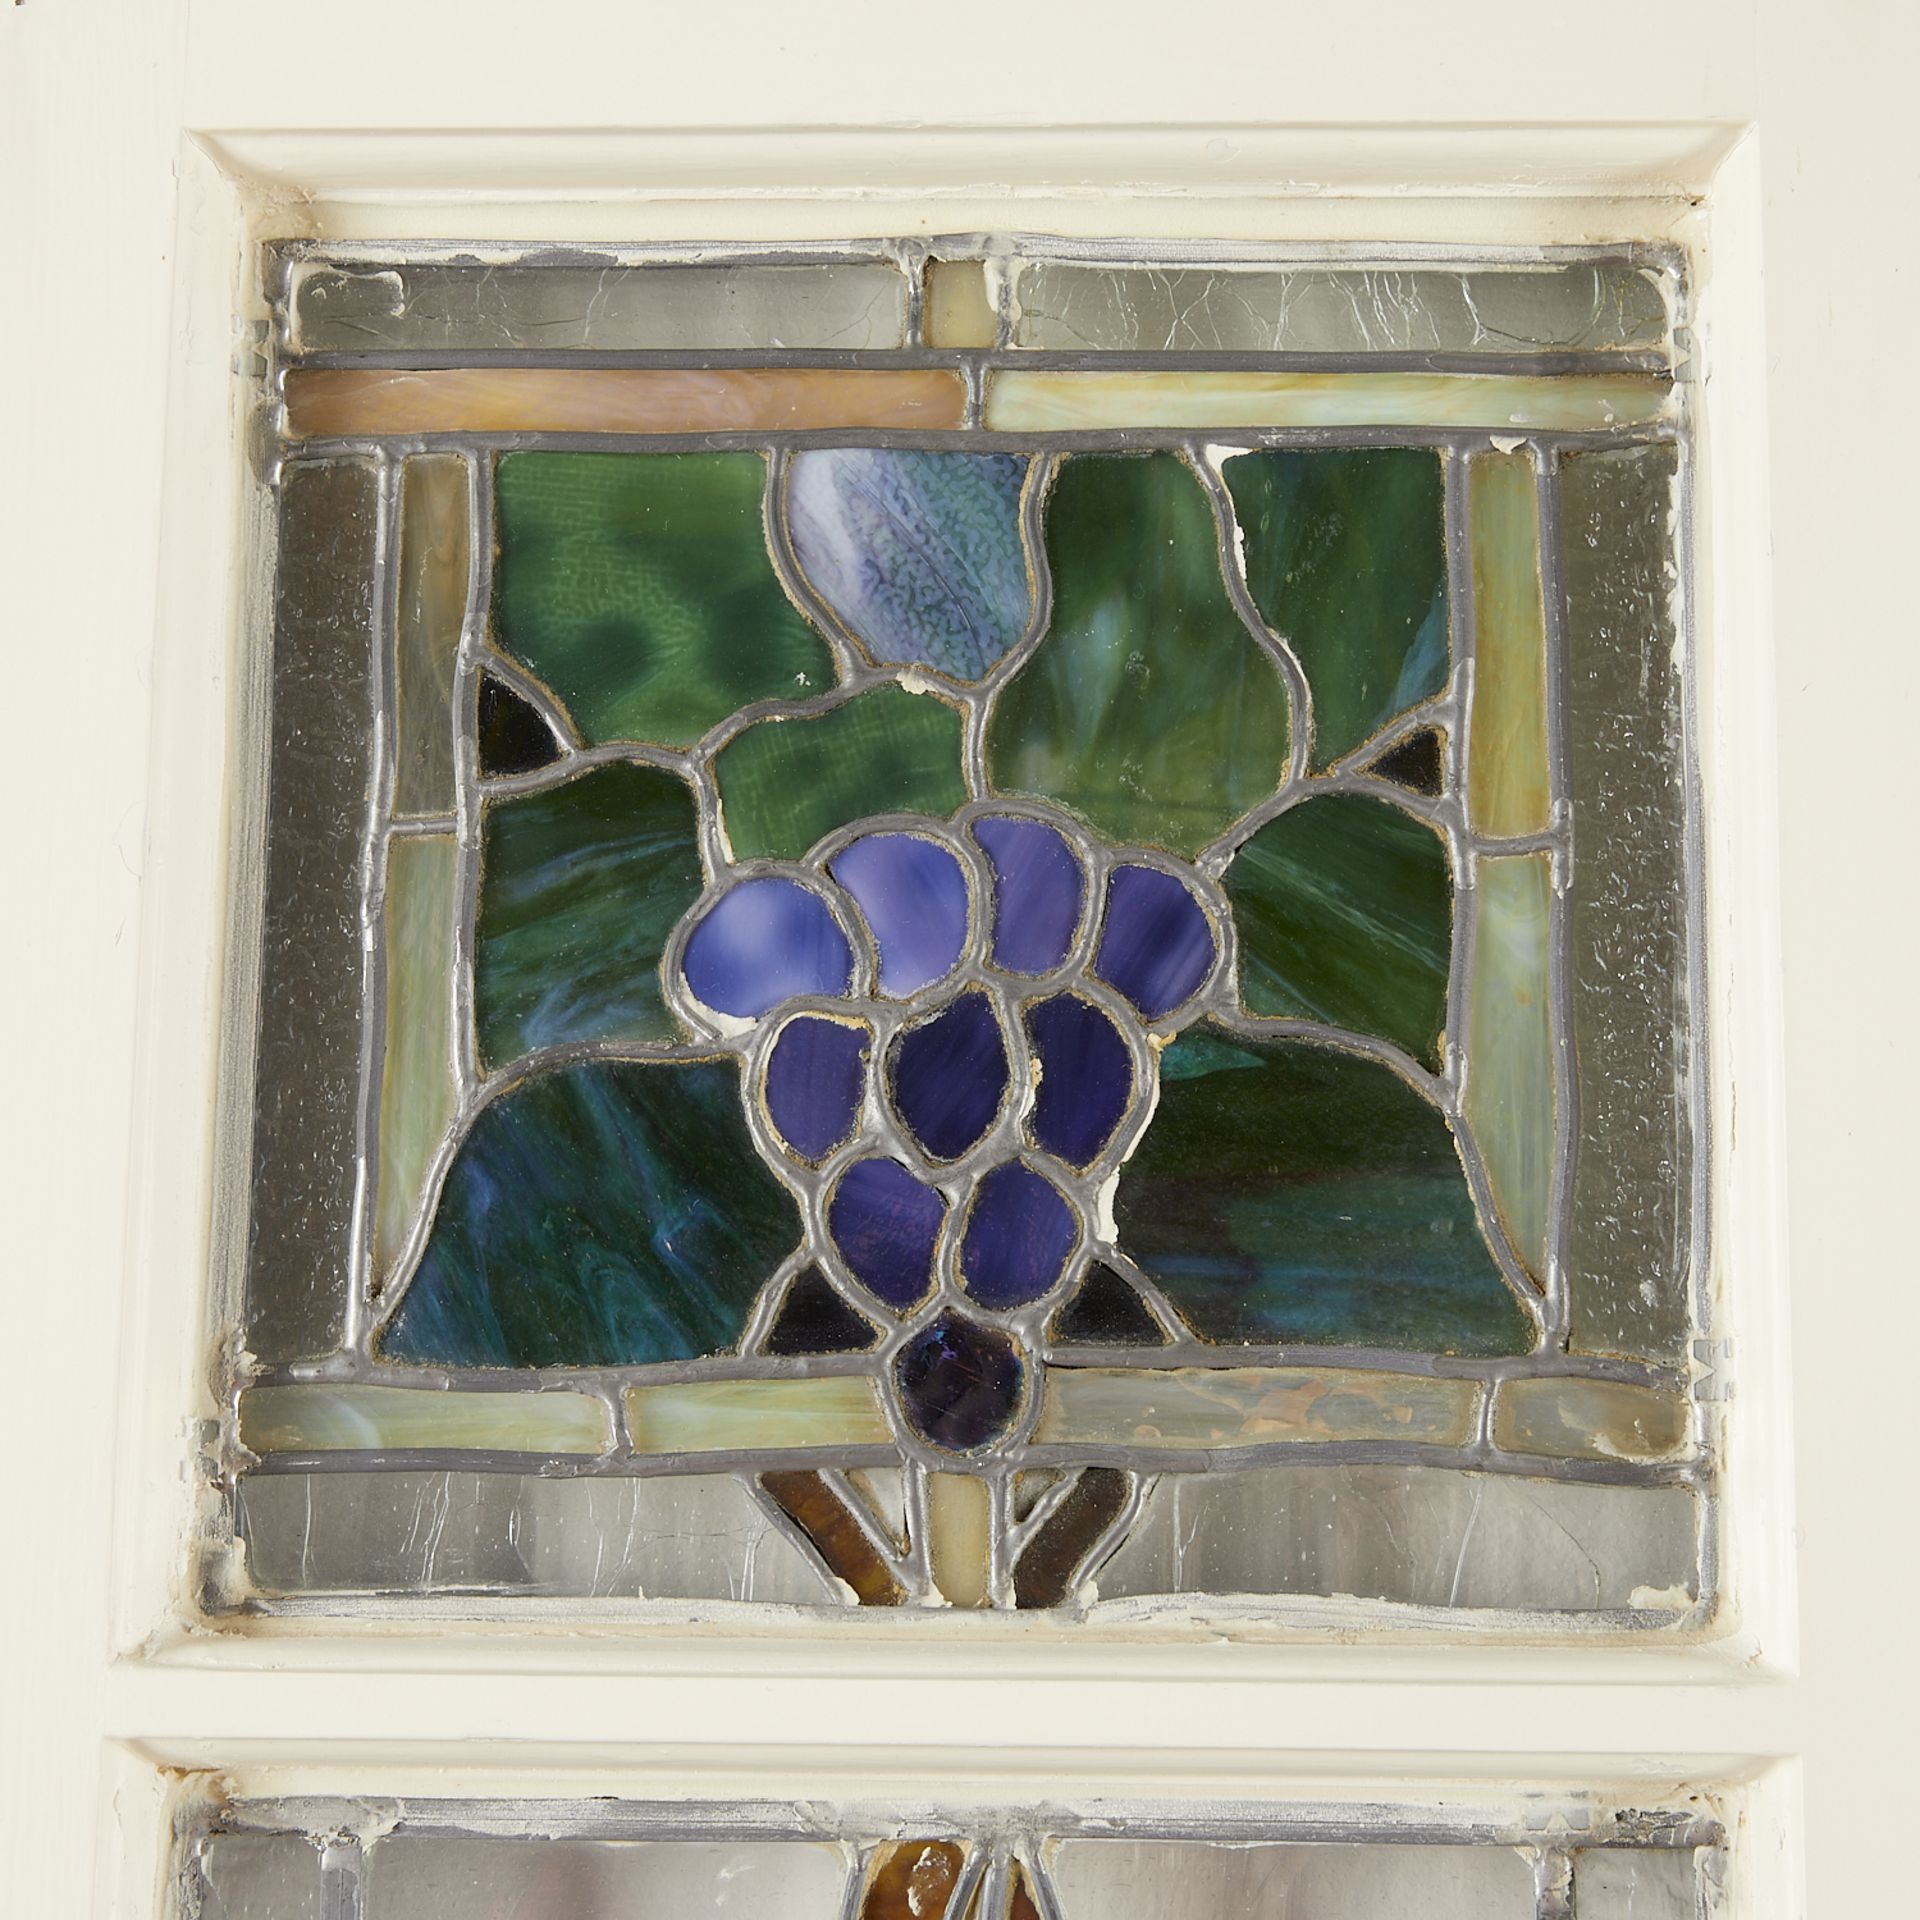 2 Antique Stained Glass Windows w/ Grapes - Image 7 of 12